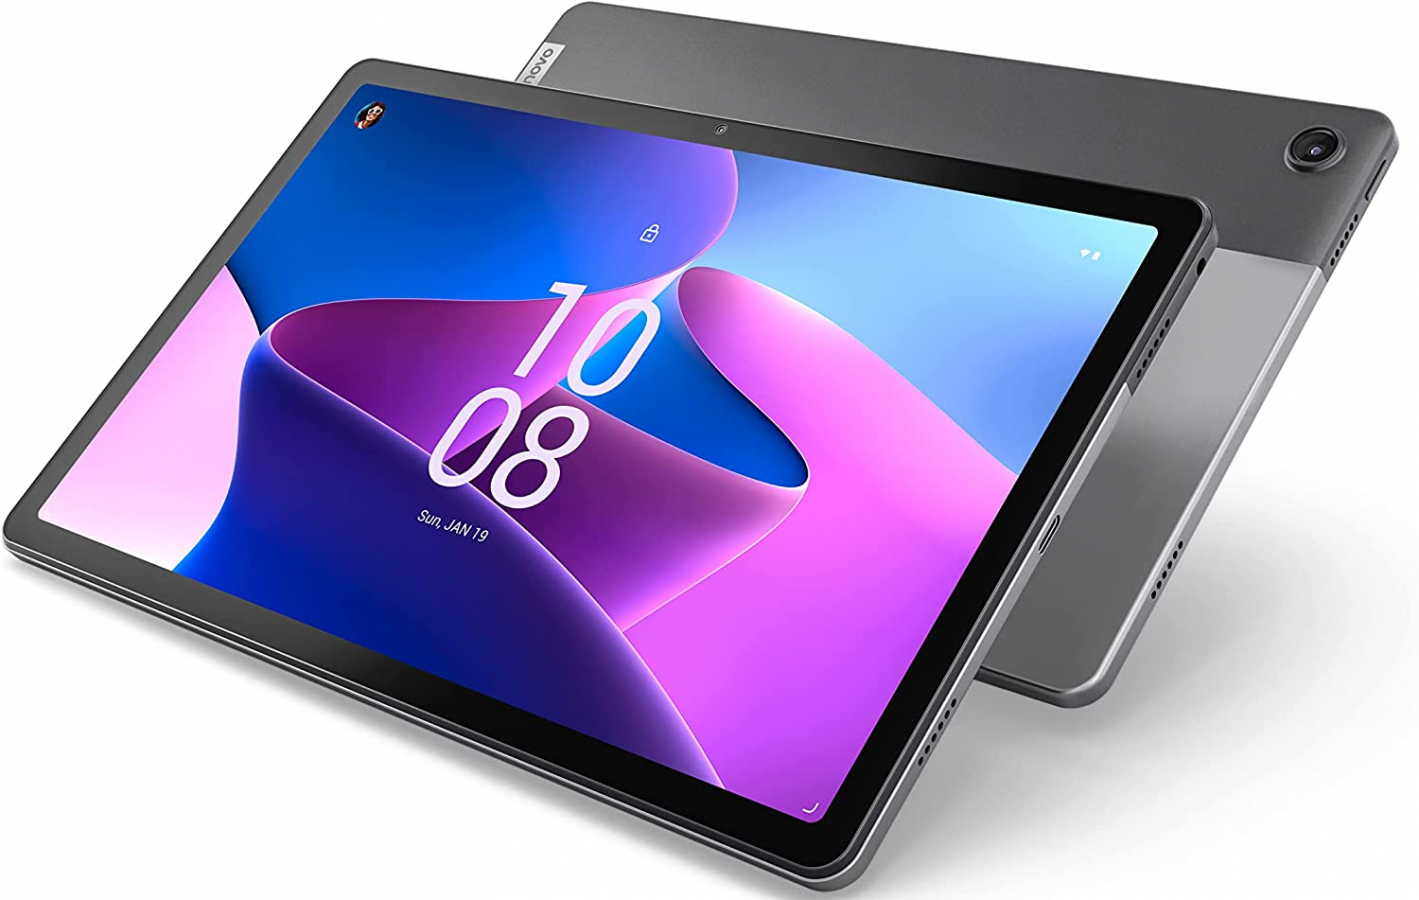 The Lenovo Tab M10 Plus (3rd Gen) with a 10.6-inch screen and a 7,700mAh  battery can be bought on  at a discounted price of $51